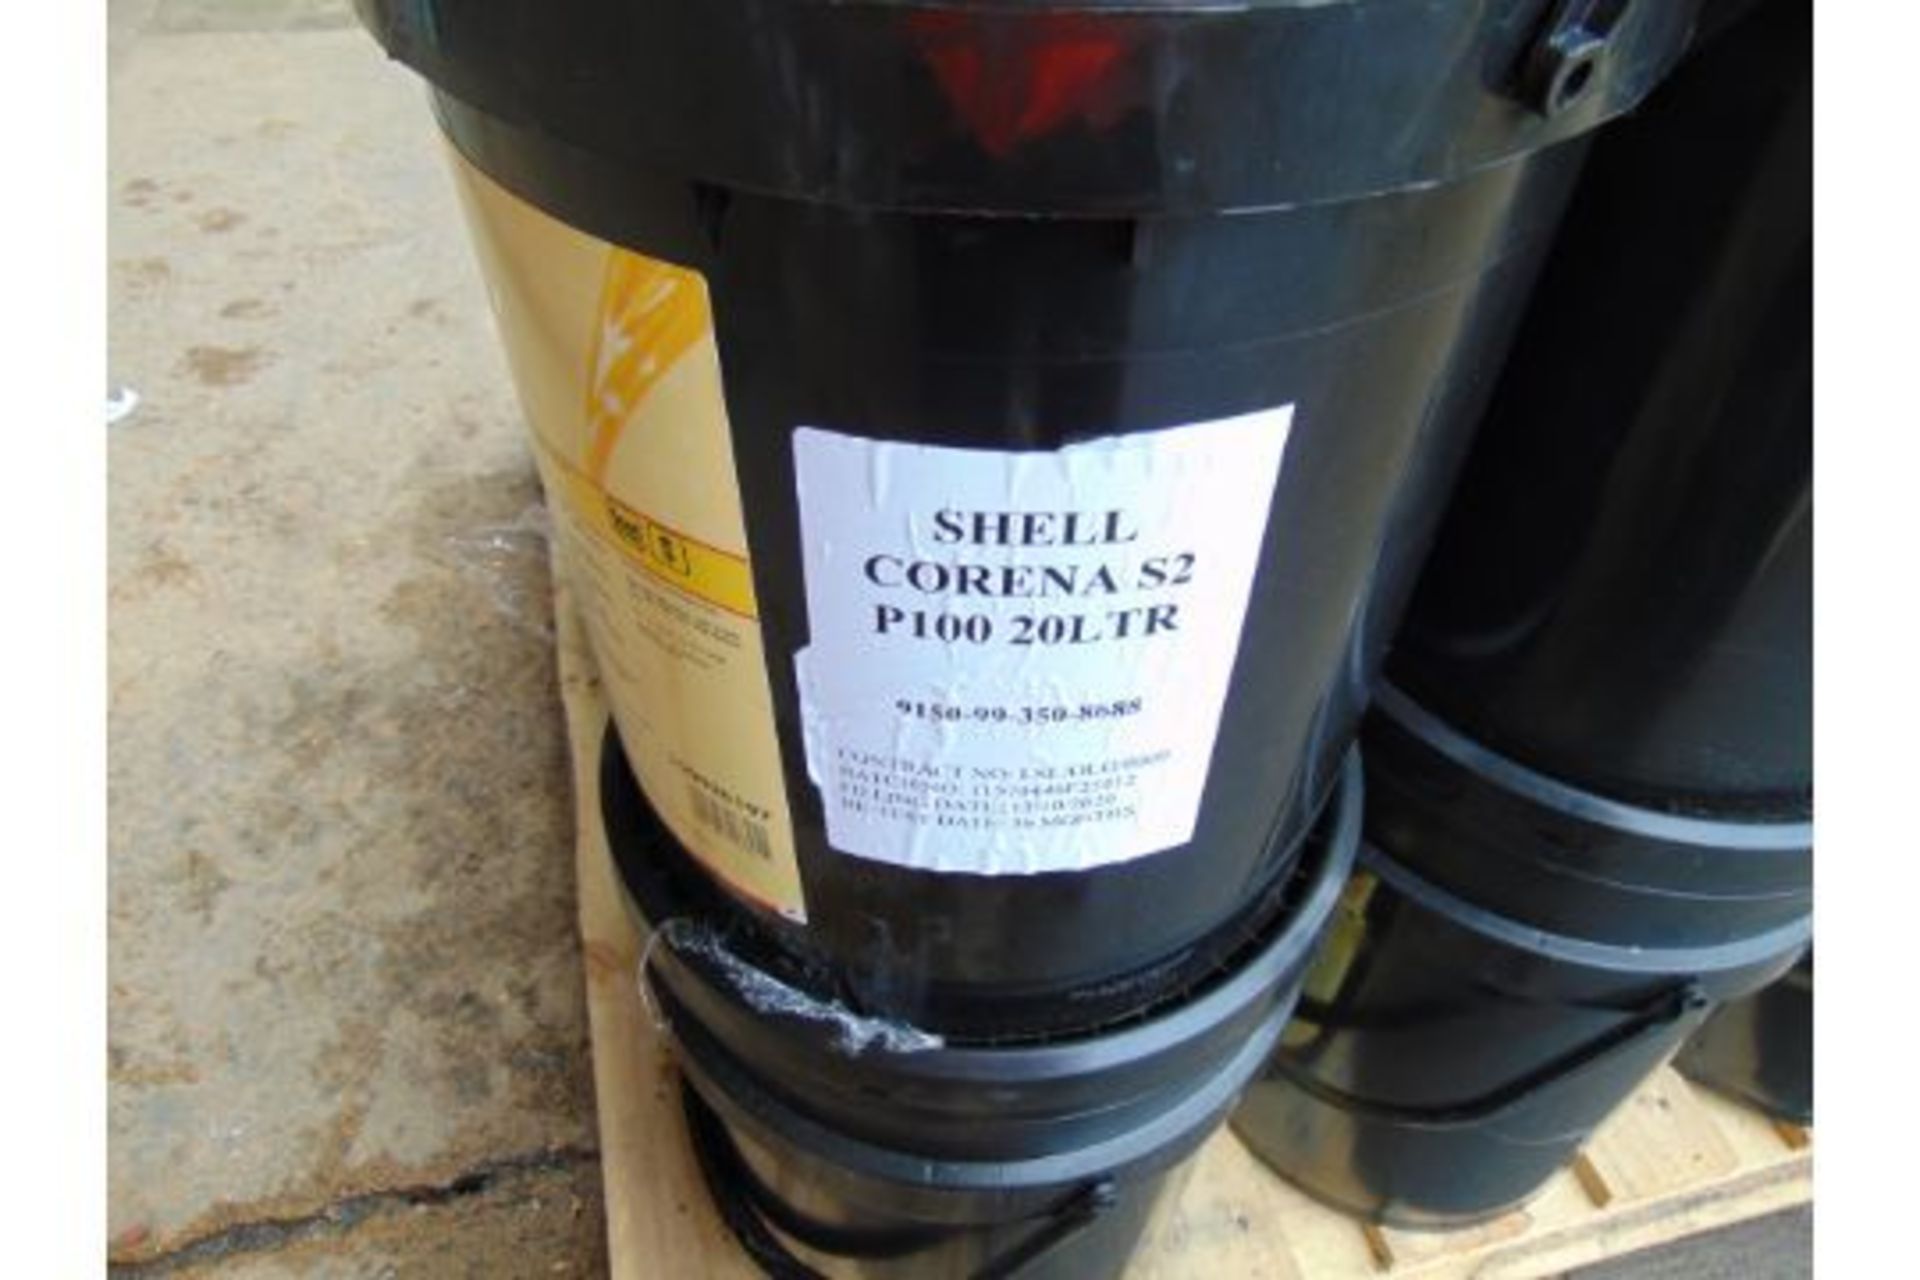 9 x 20 Litre Drums of Shell Corena S2 P100, New Unissued MoD Reserve Stocks - Image 3 of 4